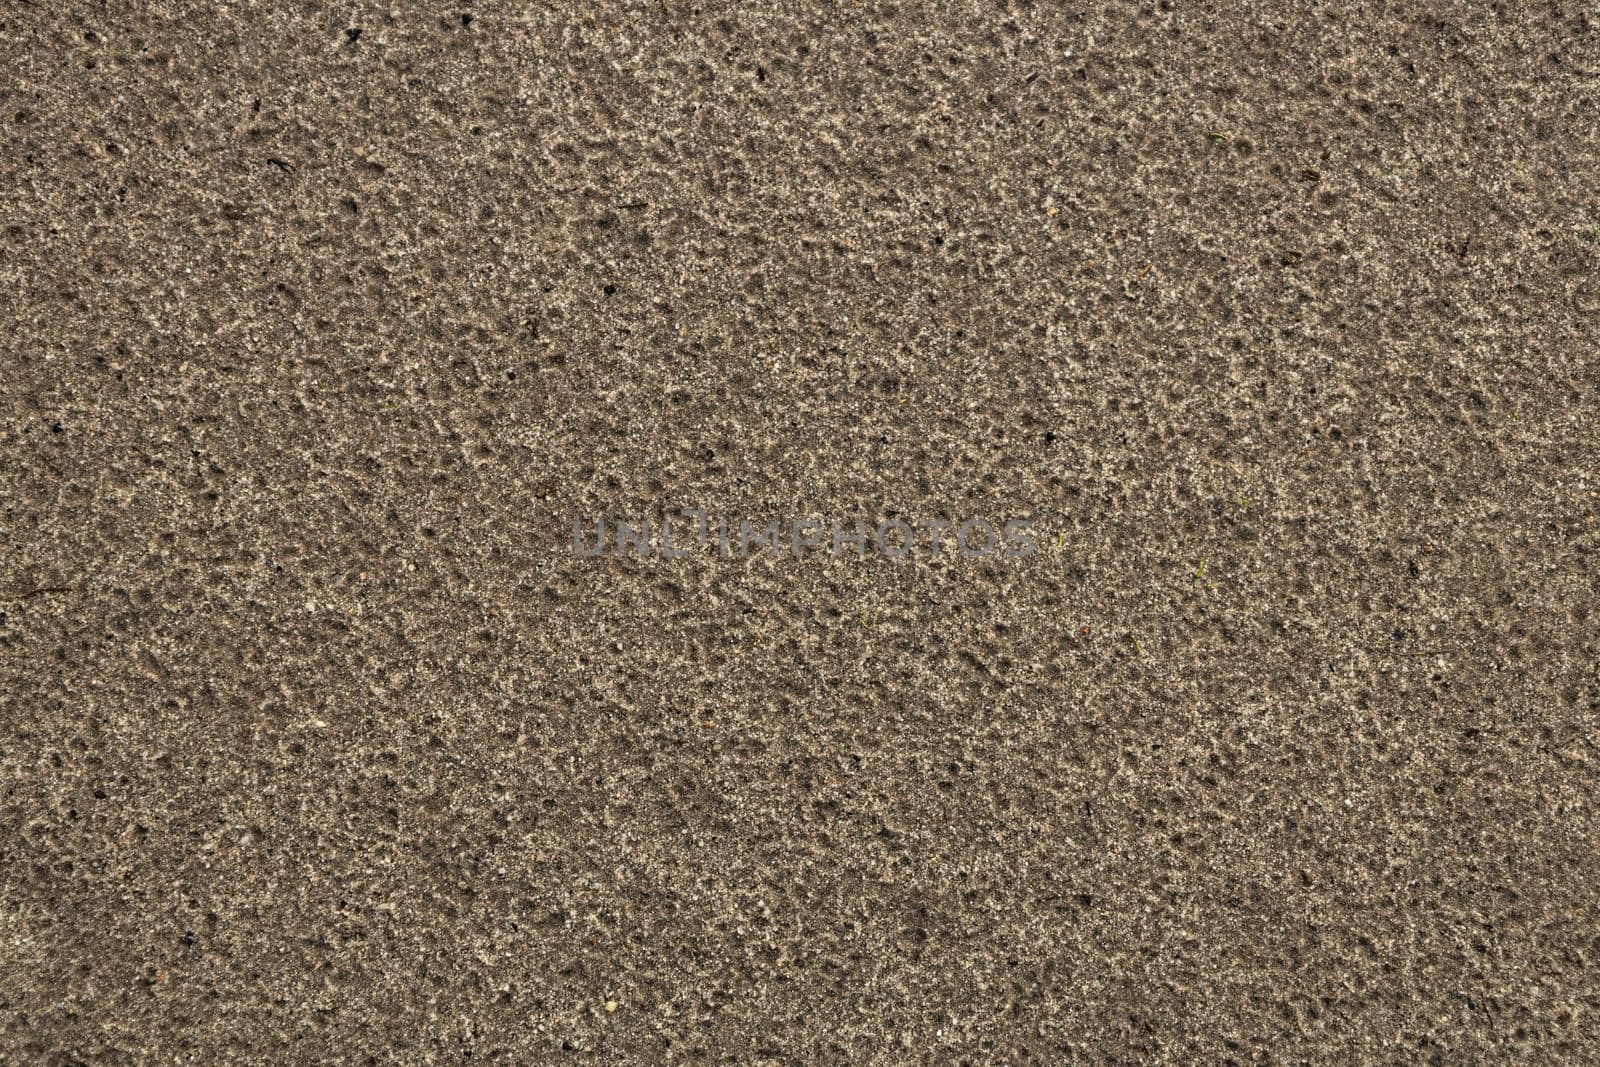 Sand after rain top view background texture pattern. High-quality photo